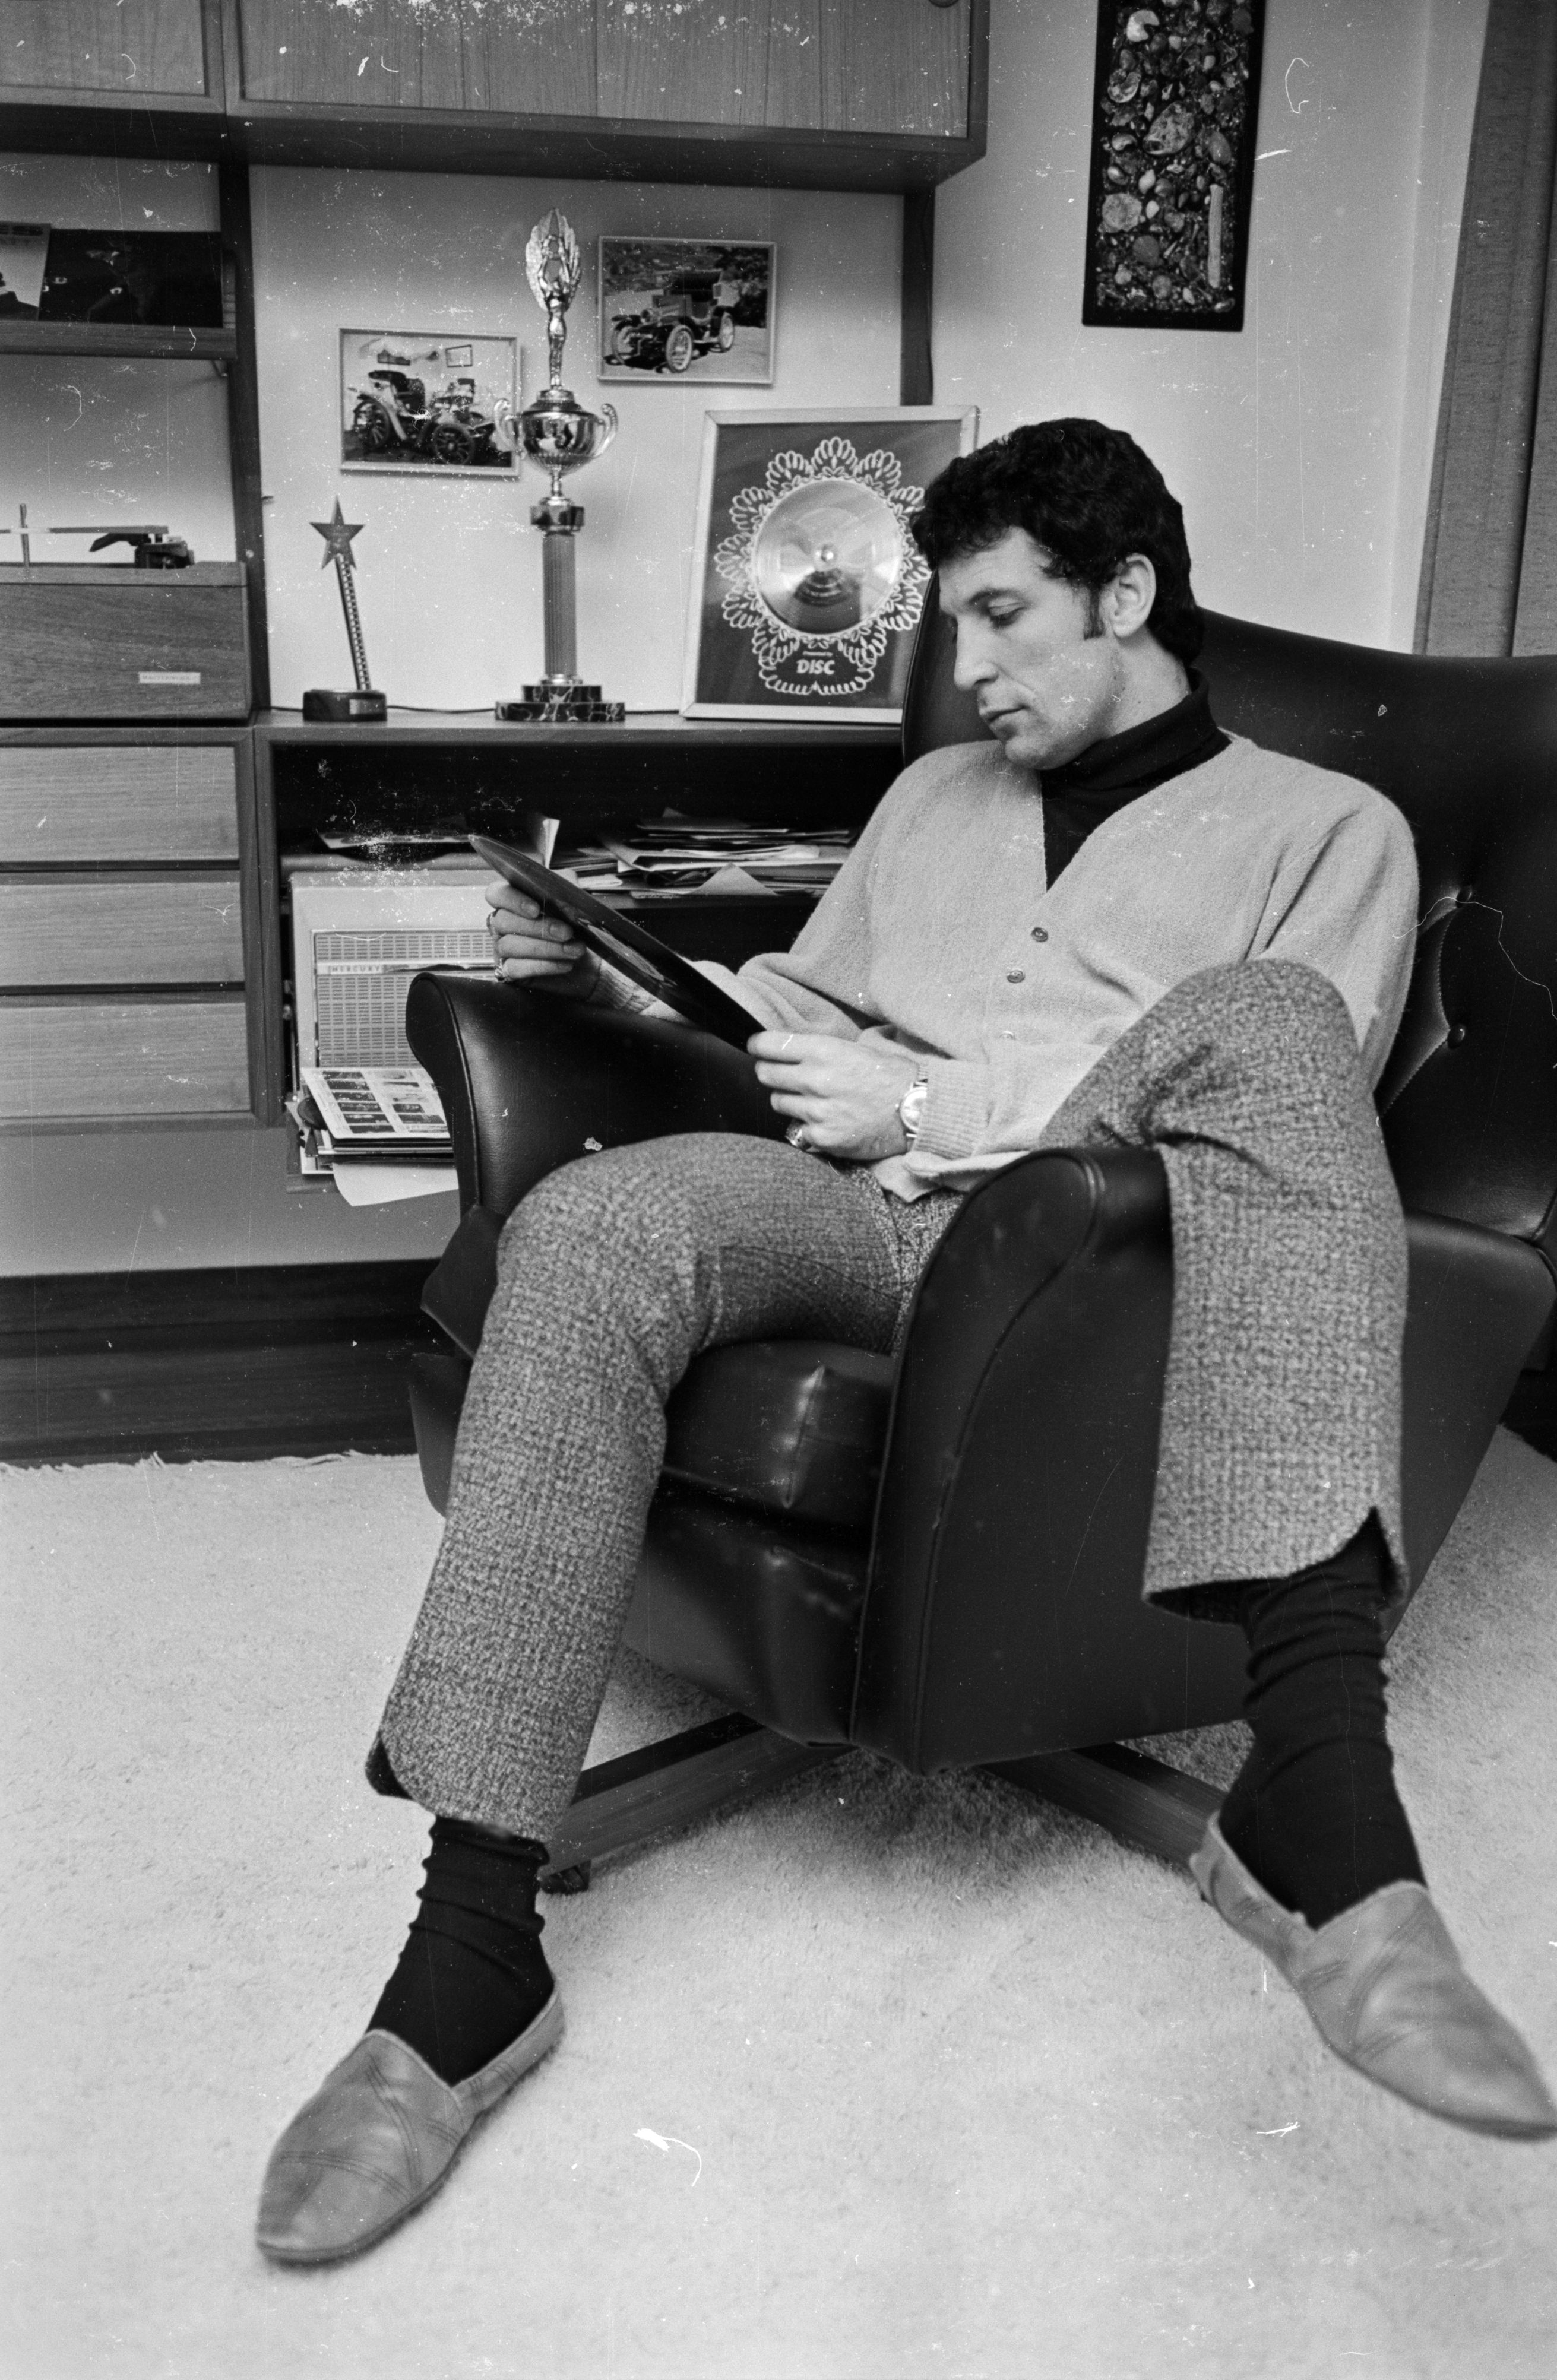 Tom Jones pictured seated while holding a record at home on April 20, 1966. / Source: Getty Images